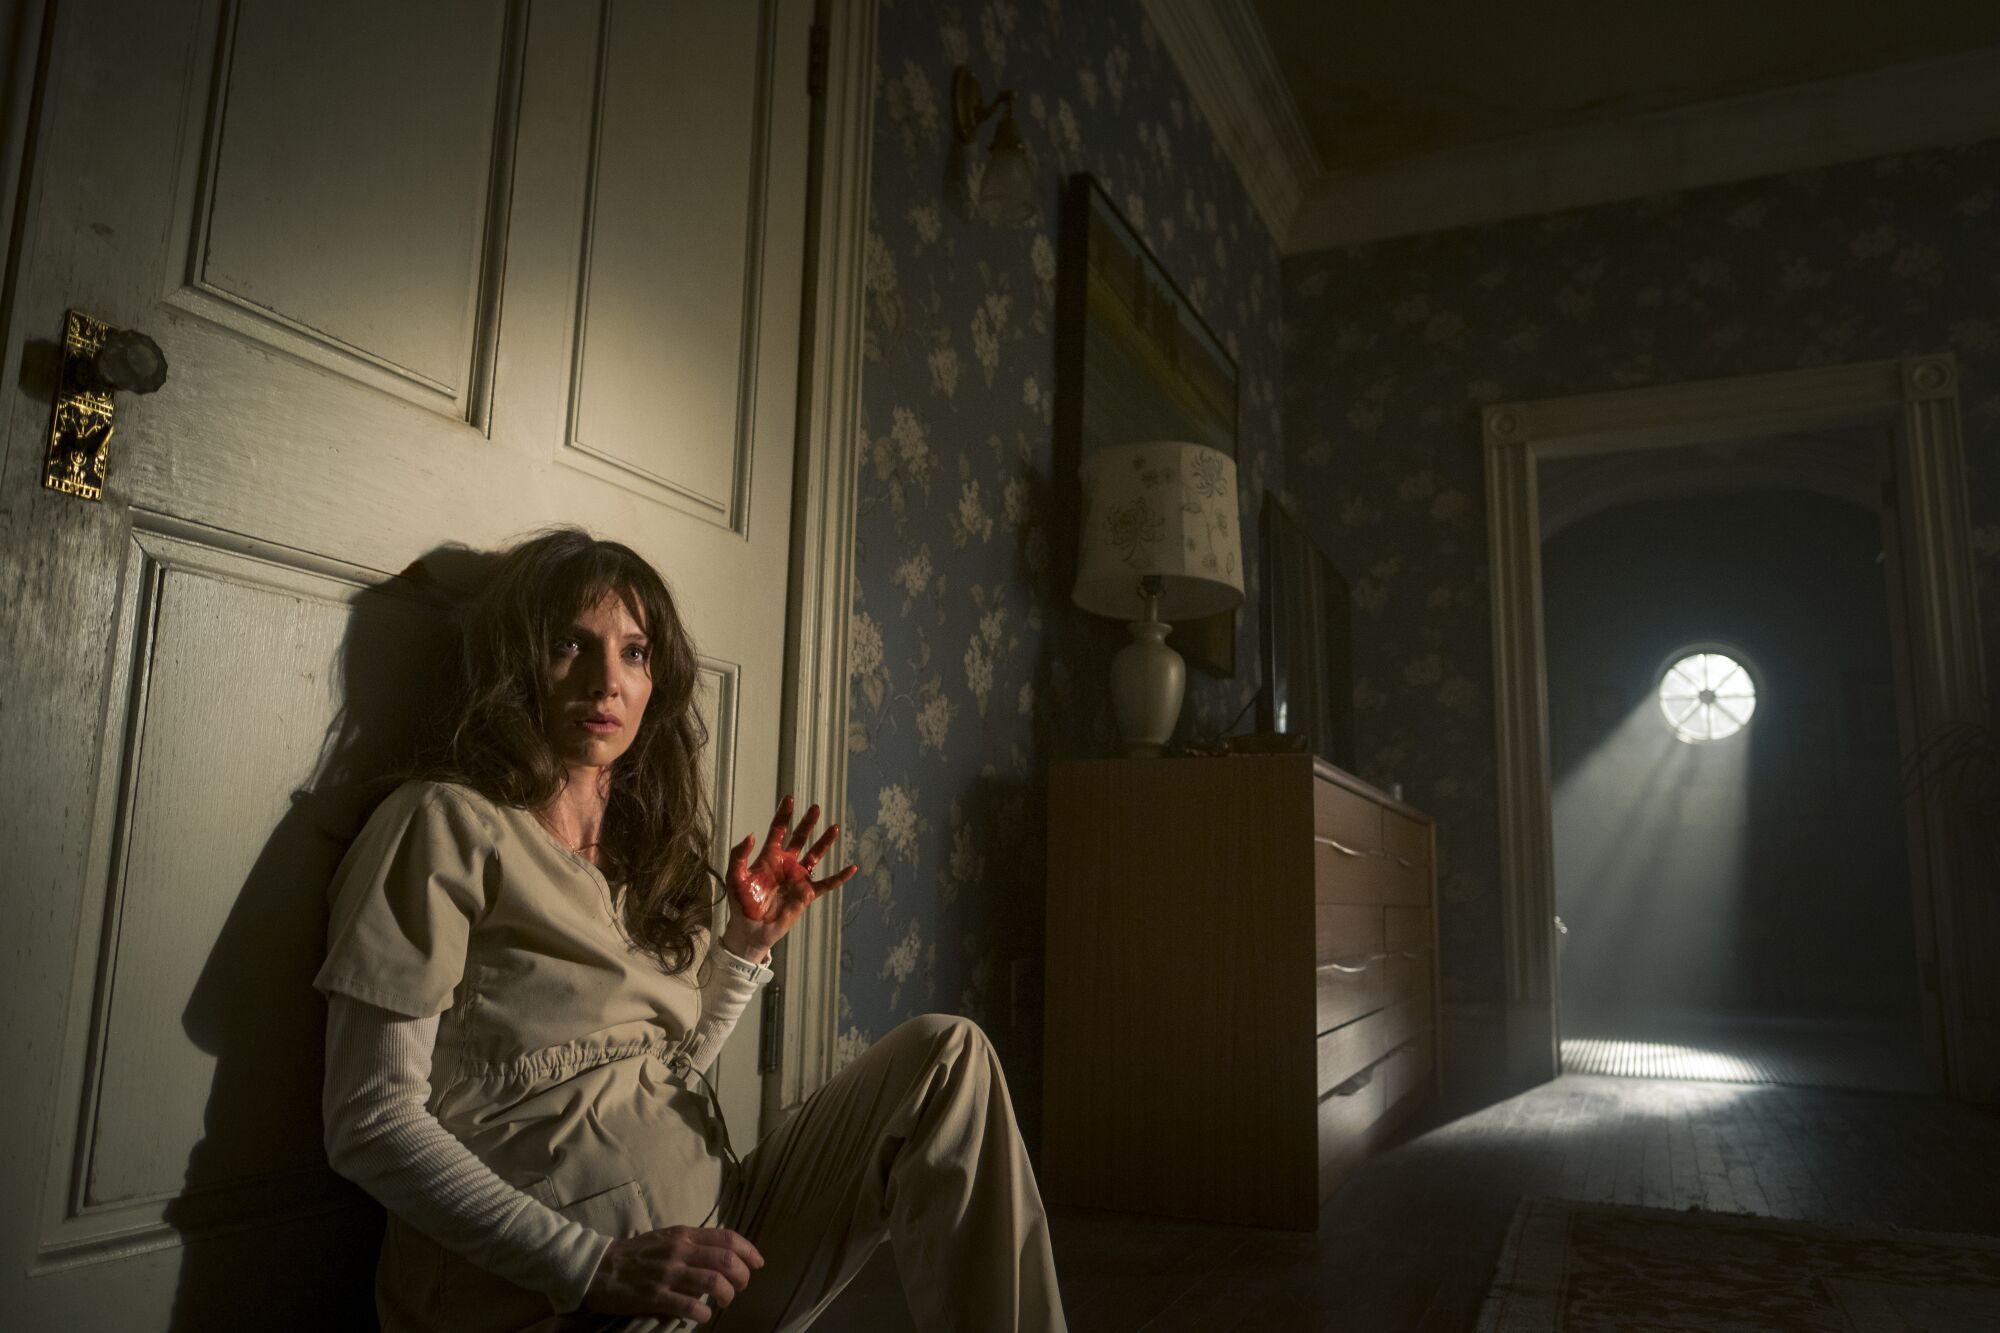 A woman sits on the floor against a closed door in spooky lighting